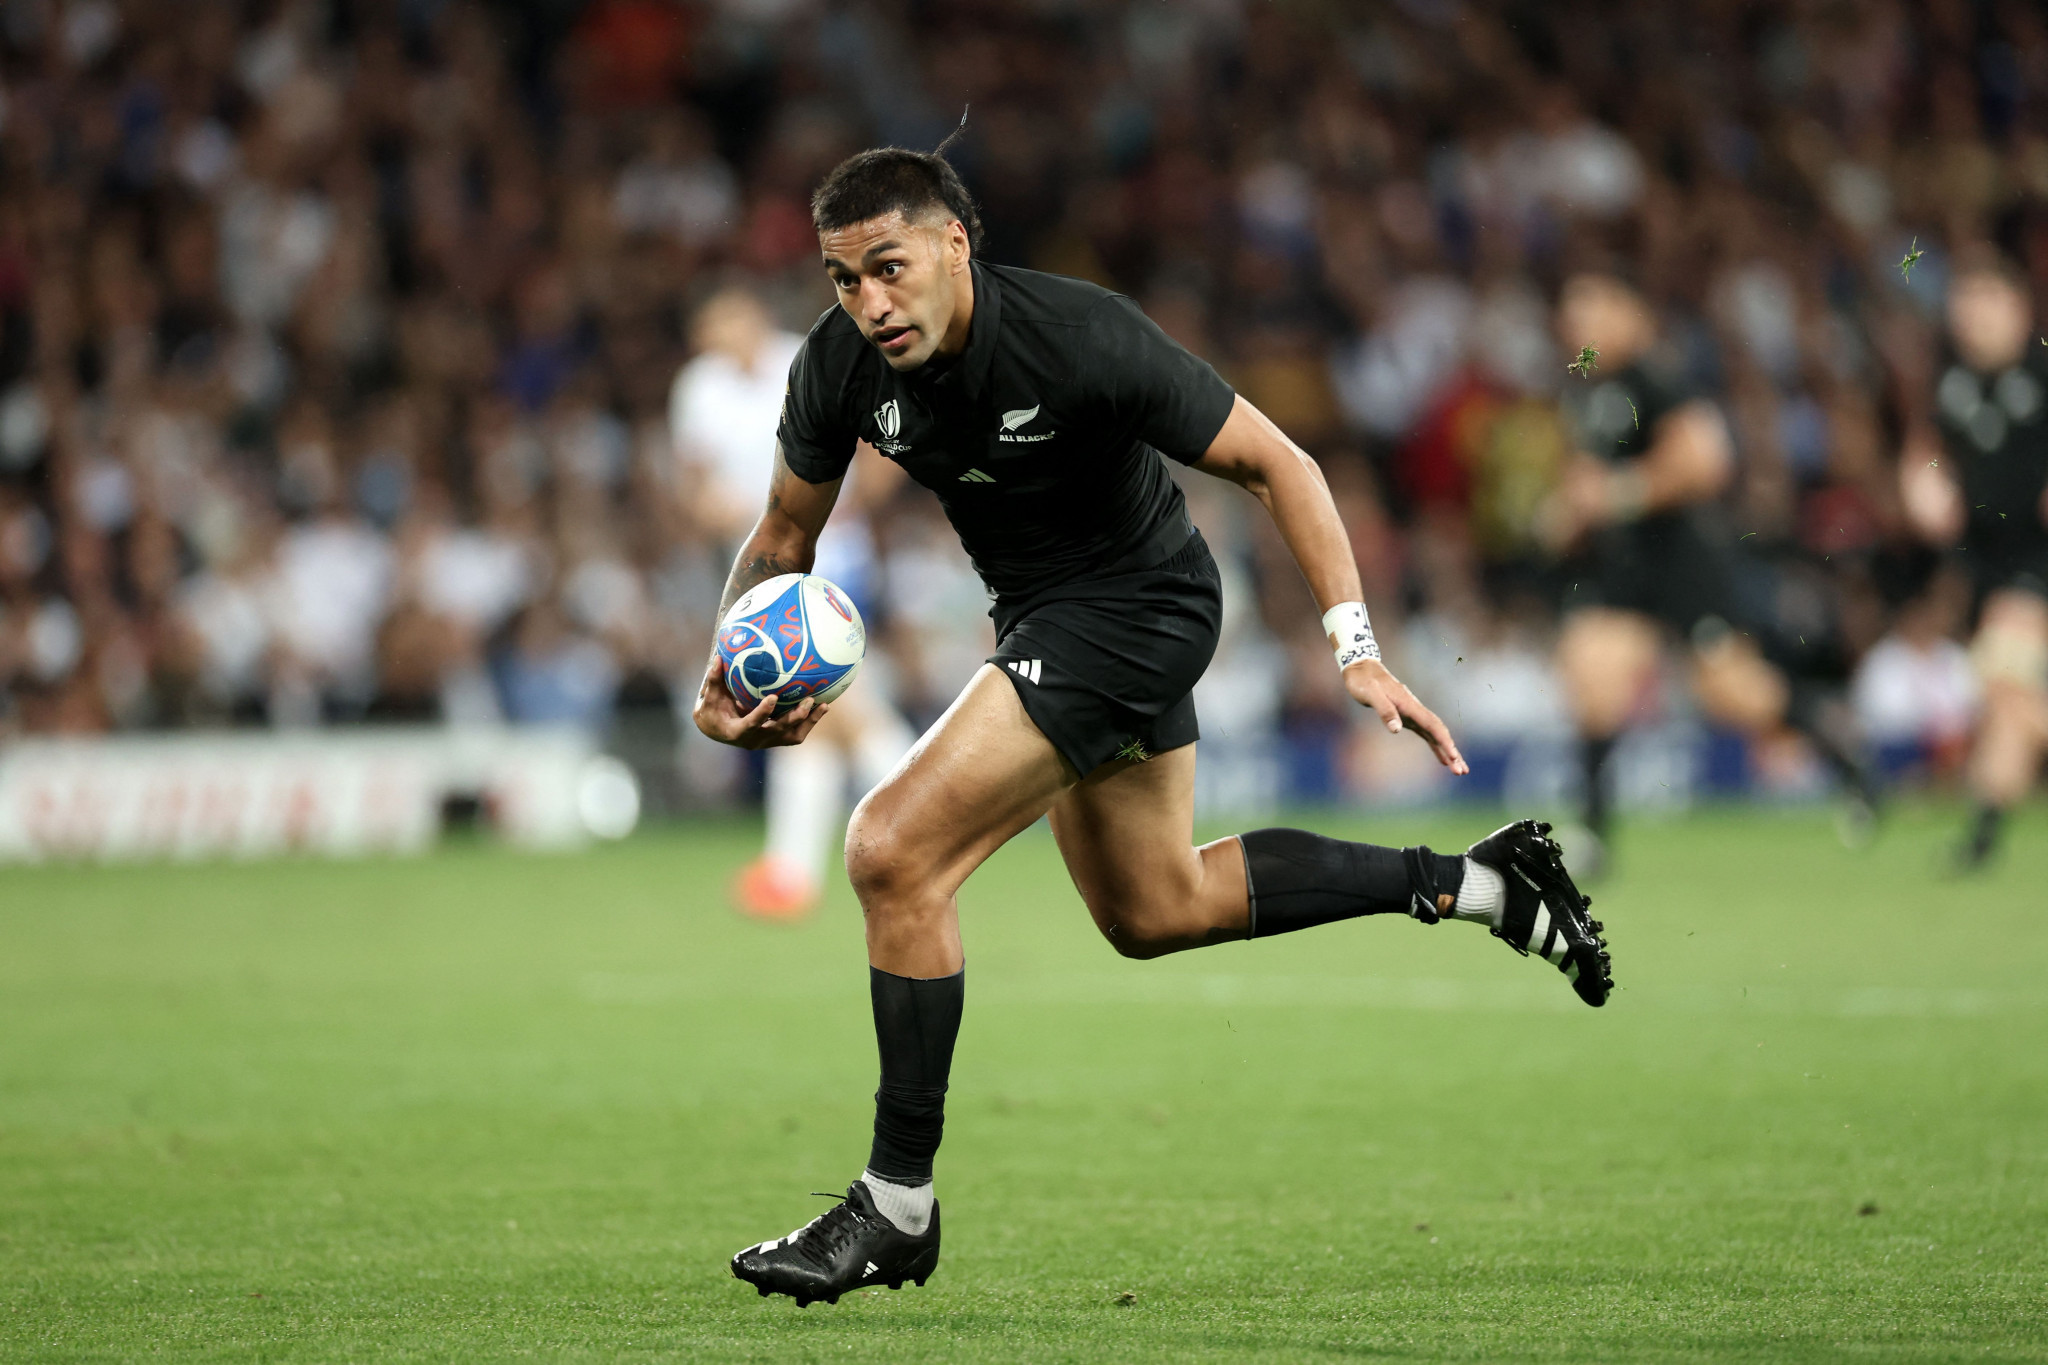 New Zealand back to winning ways at Rugby World Cup despite red card